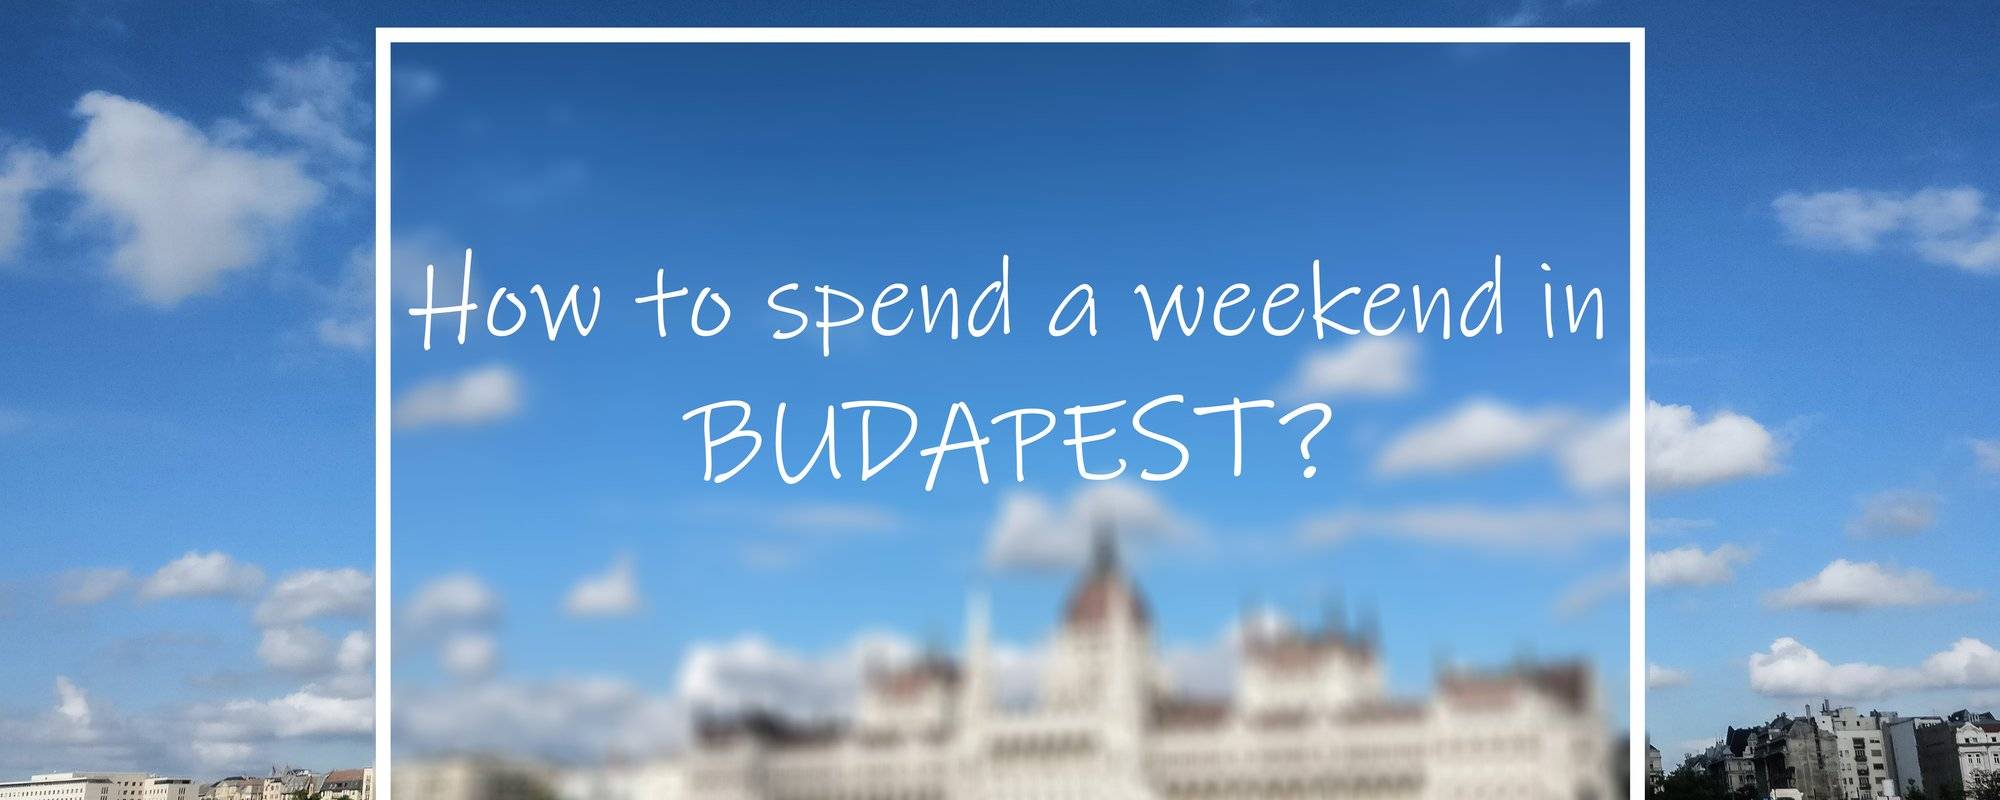 HOW to spend a WEEKEND in BUDAPEST?